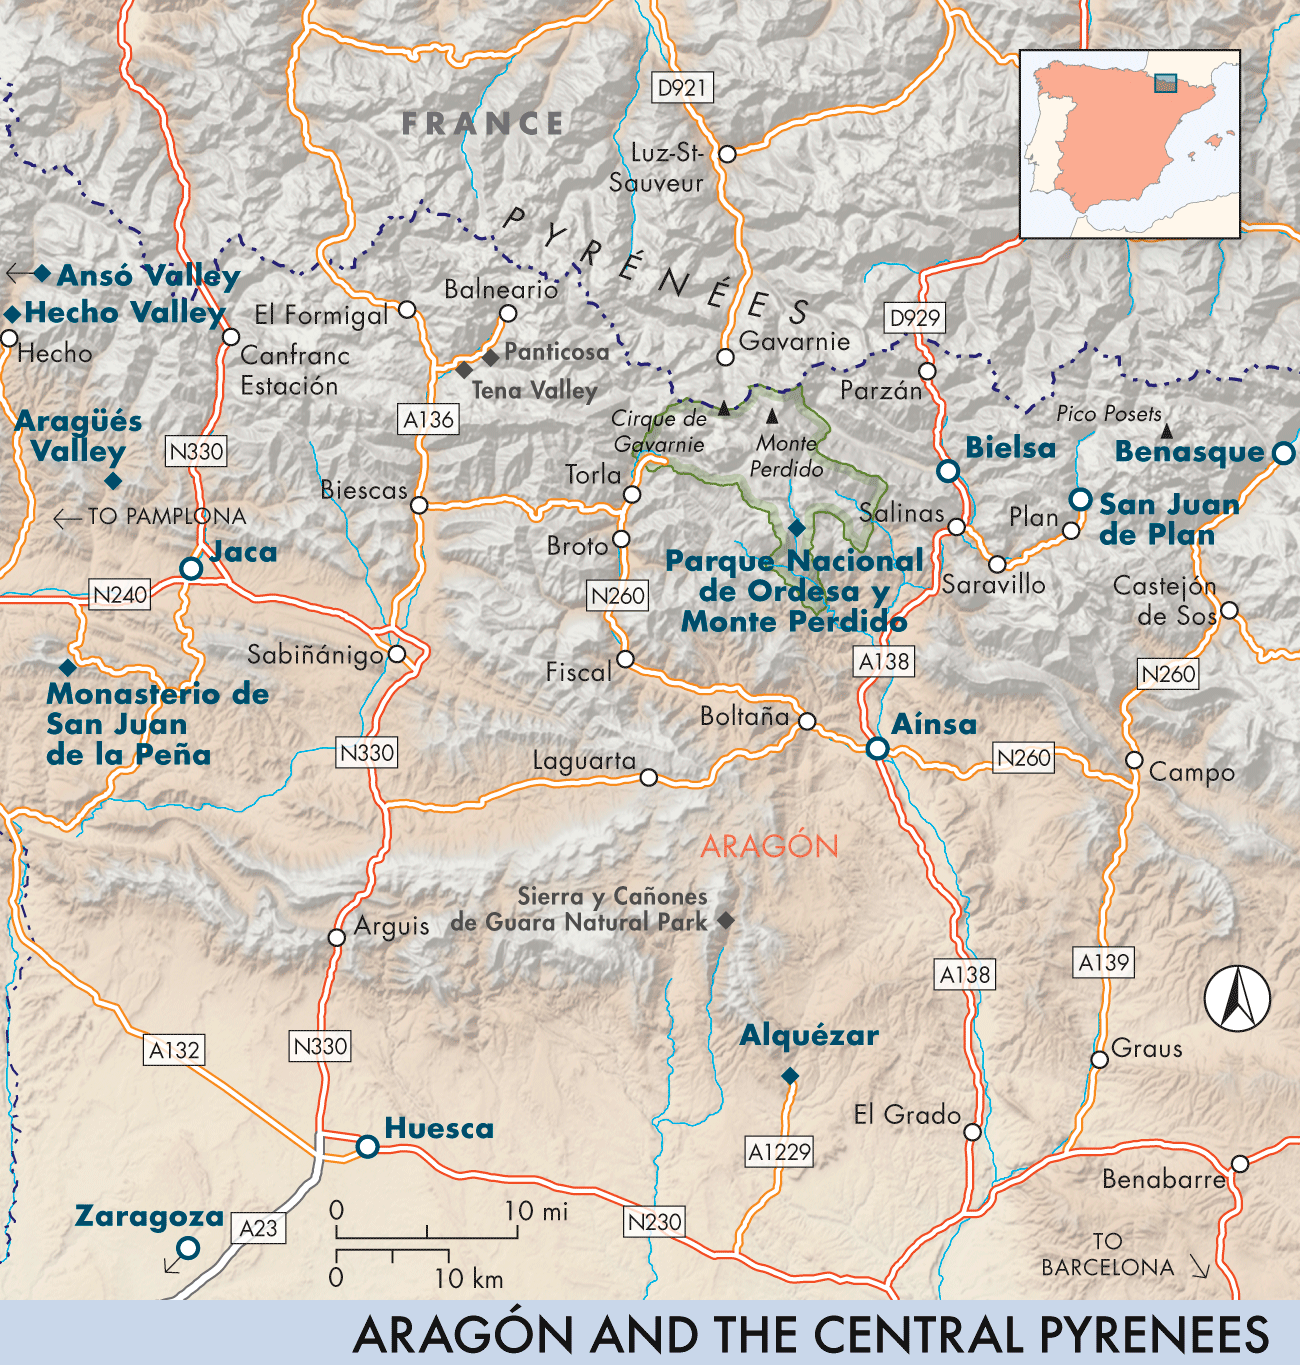 Aragón and the Central Pyrenees